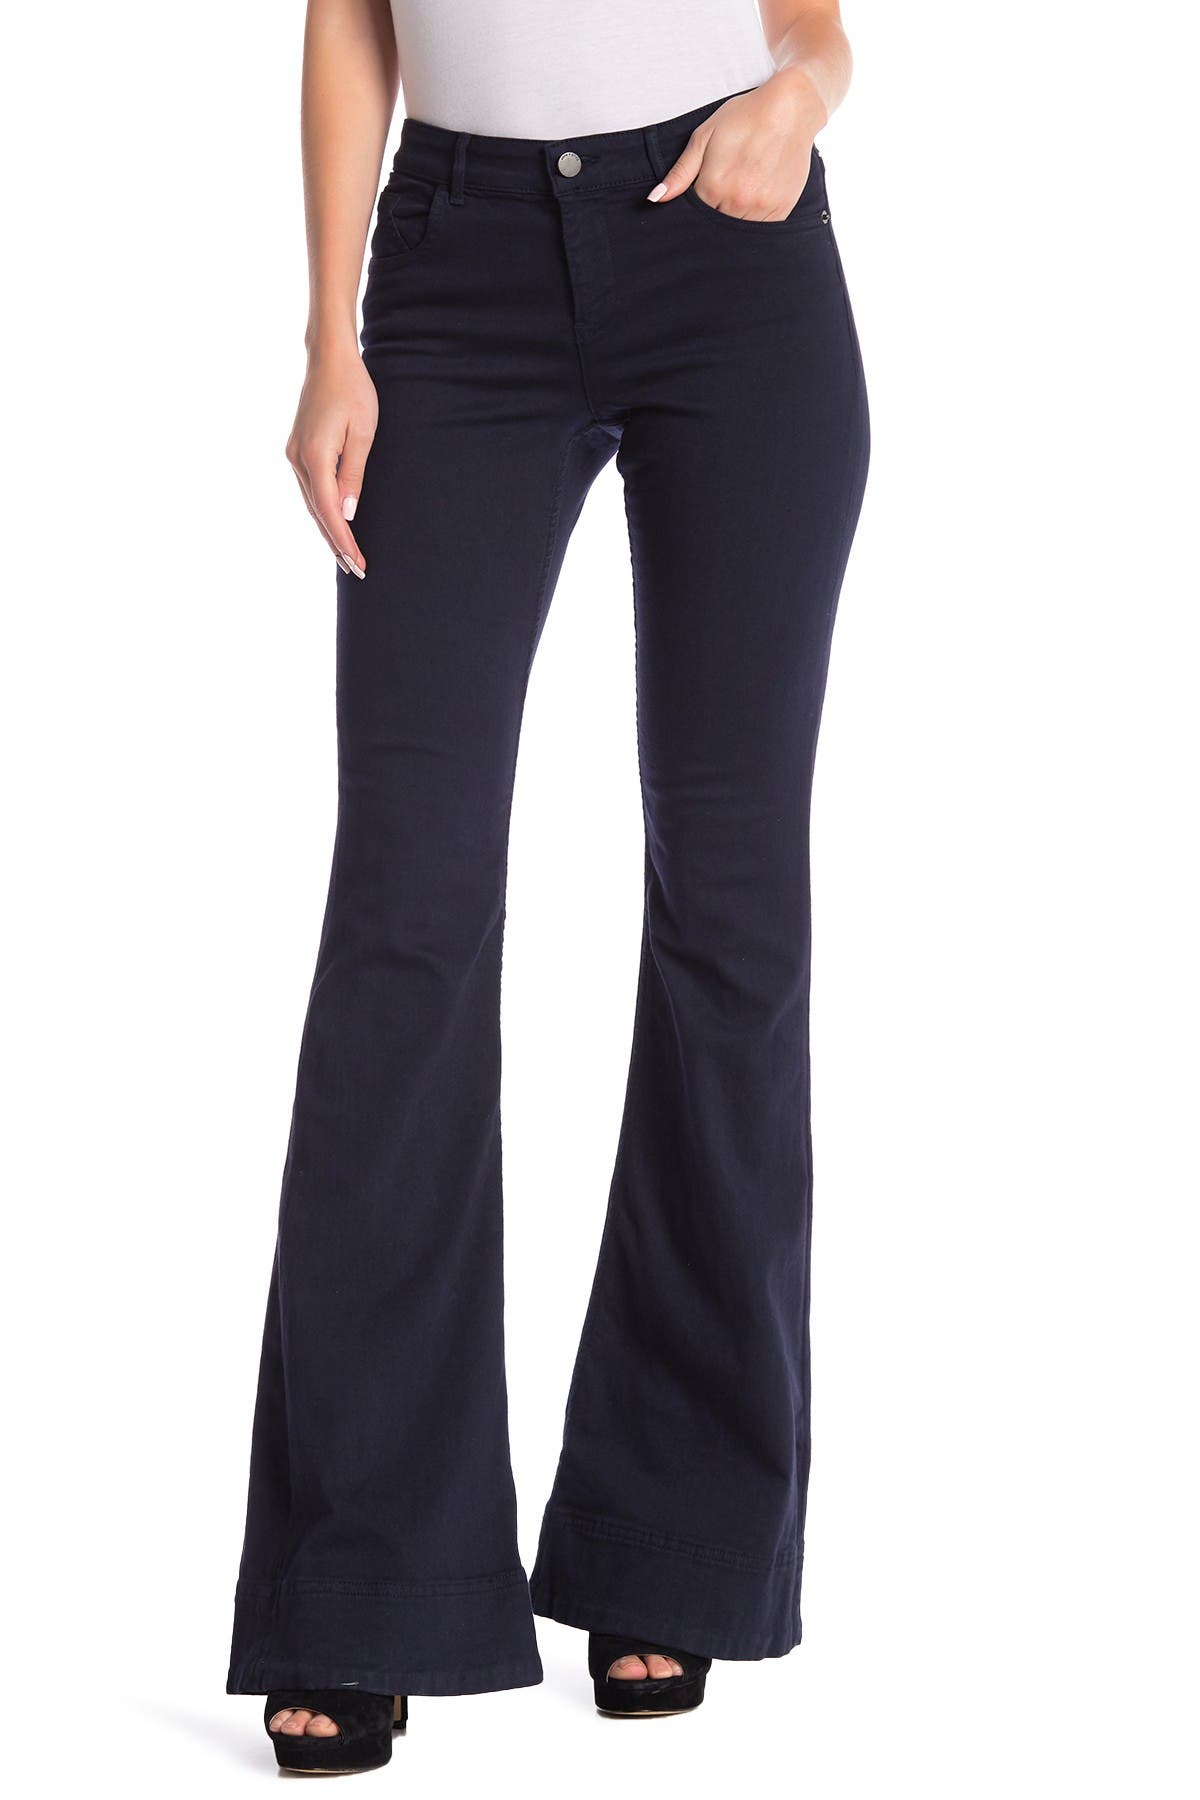 low rise bell bottoms